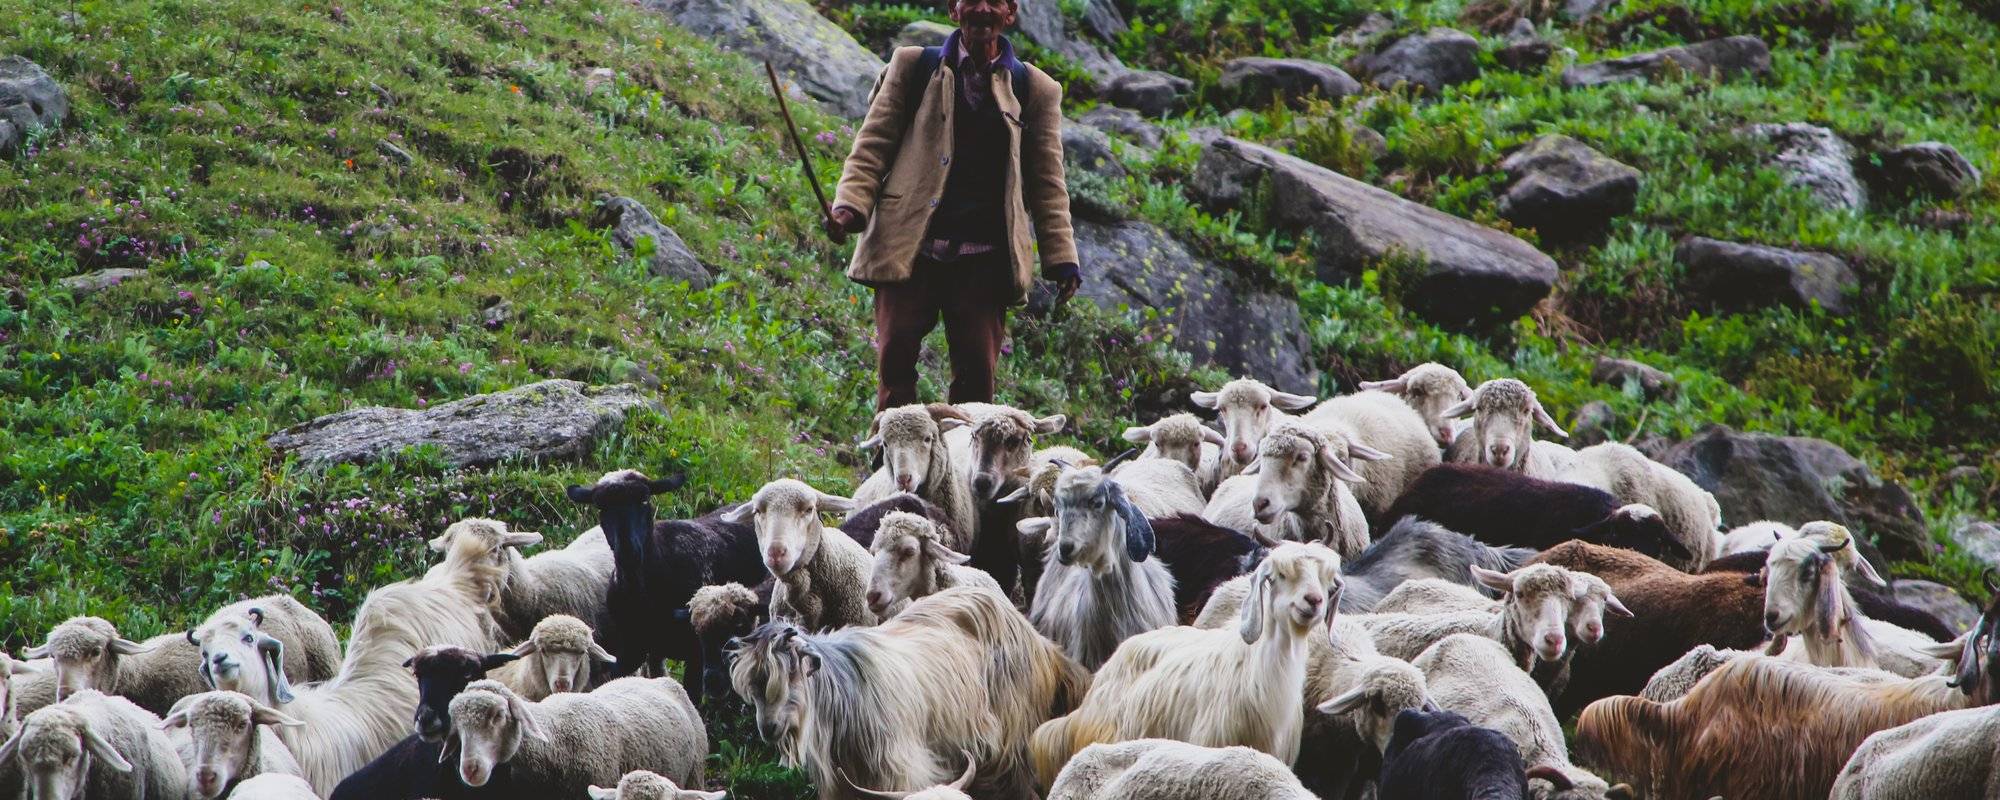 Shepherds, sheep and their life in Himalayas.